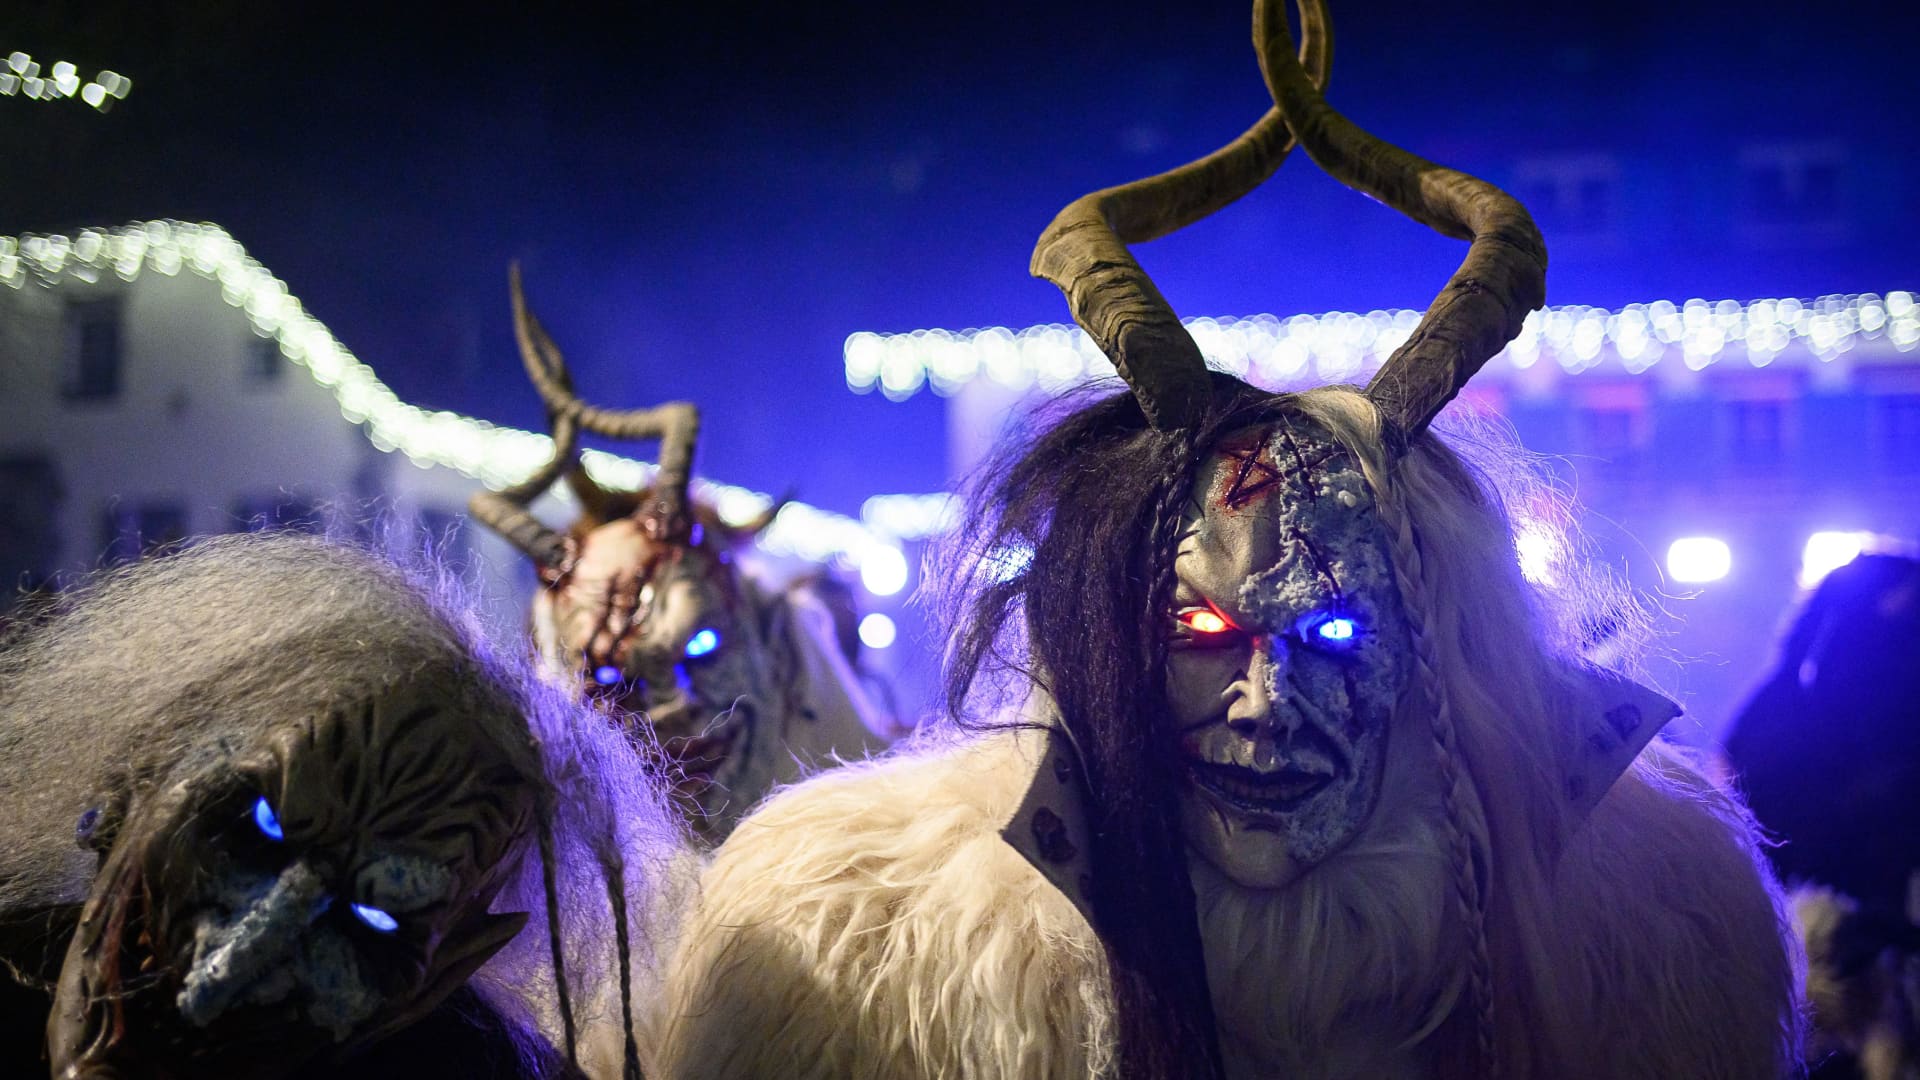 Krampus costumes often consist of a mask, horn, coat made of sheep or goat wool, as well as chains, bells and a rod, according to Helen Bitschnau, a representative of the Austrian National Tourist Office.